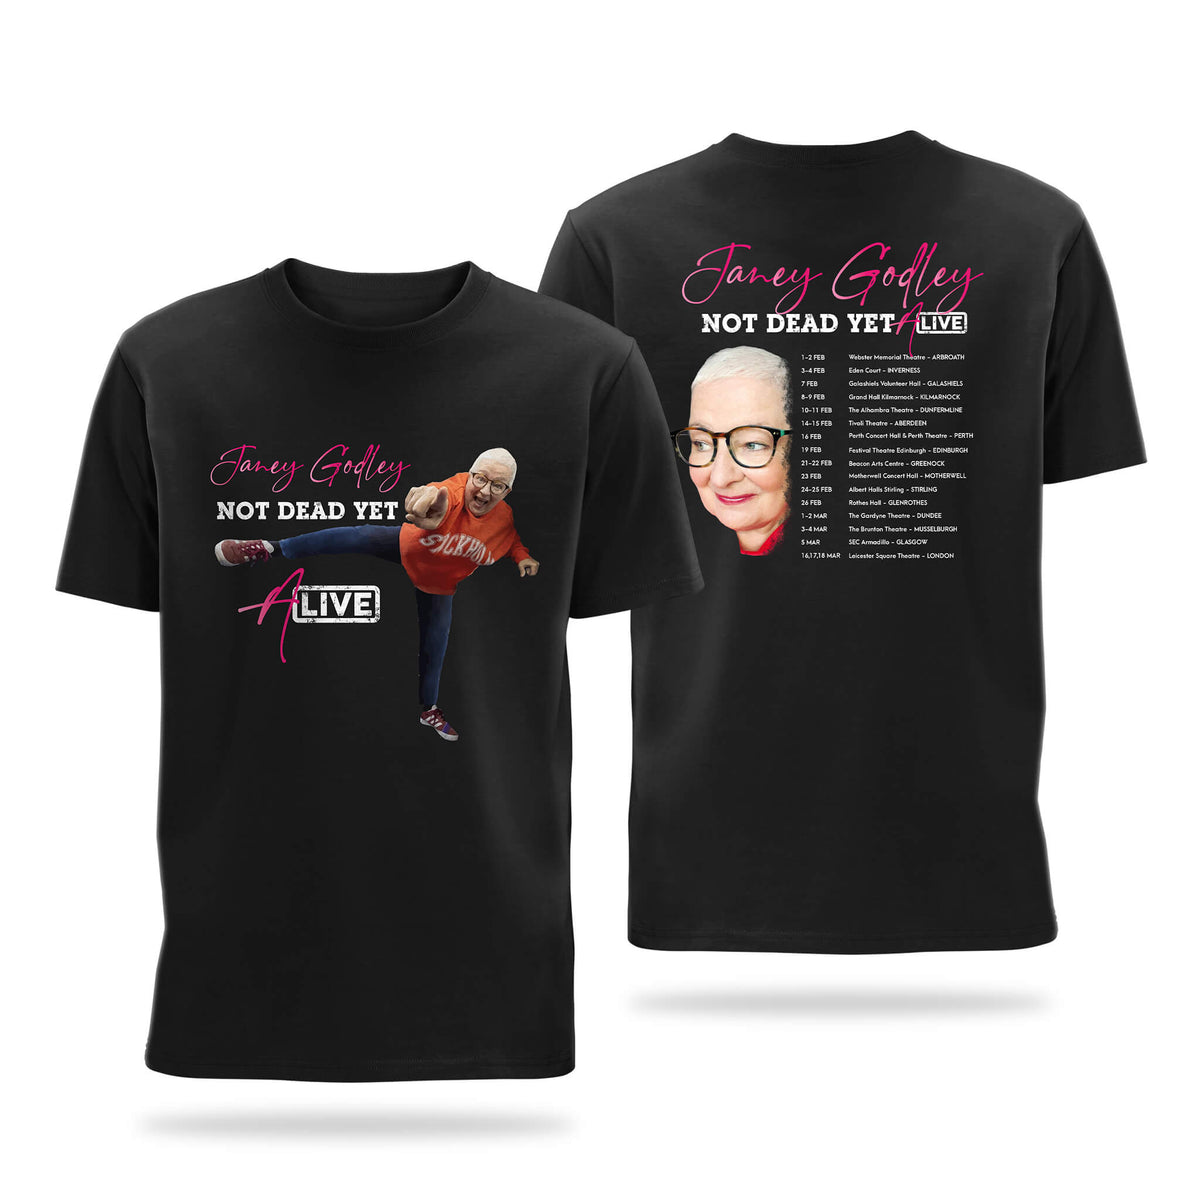 Black Janey Godley Not Dead Yet Official Tour T-Shirt with tour dates on the back